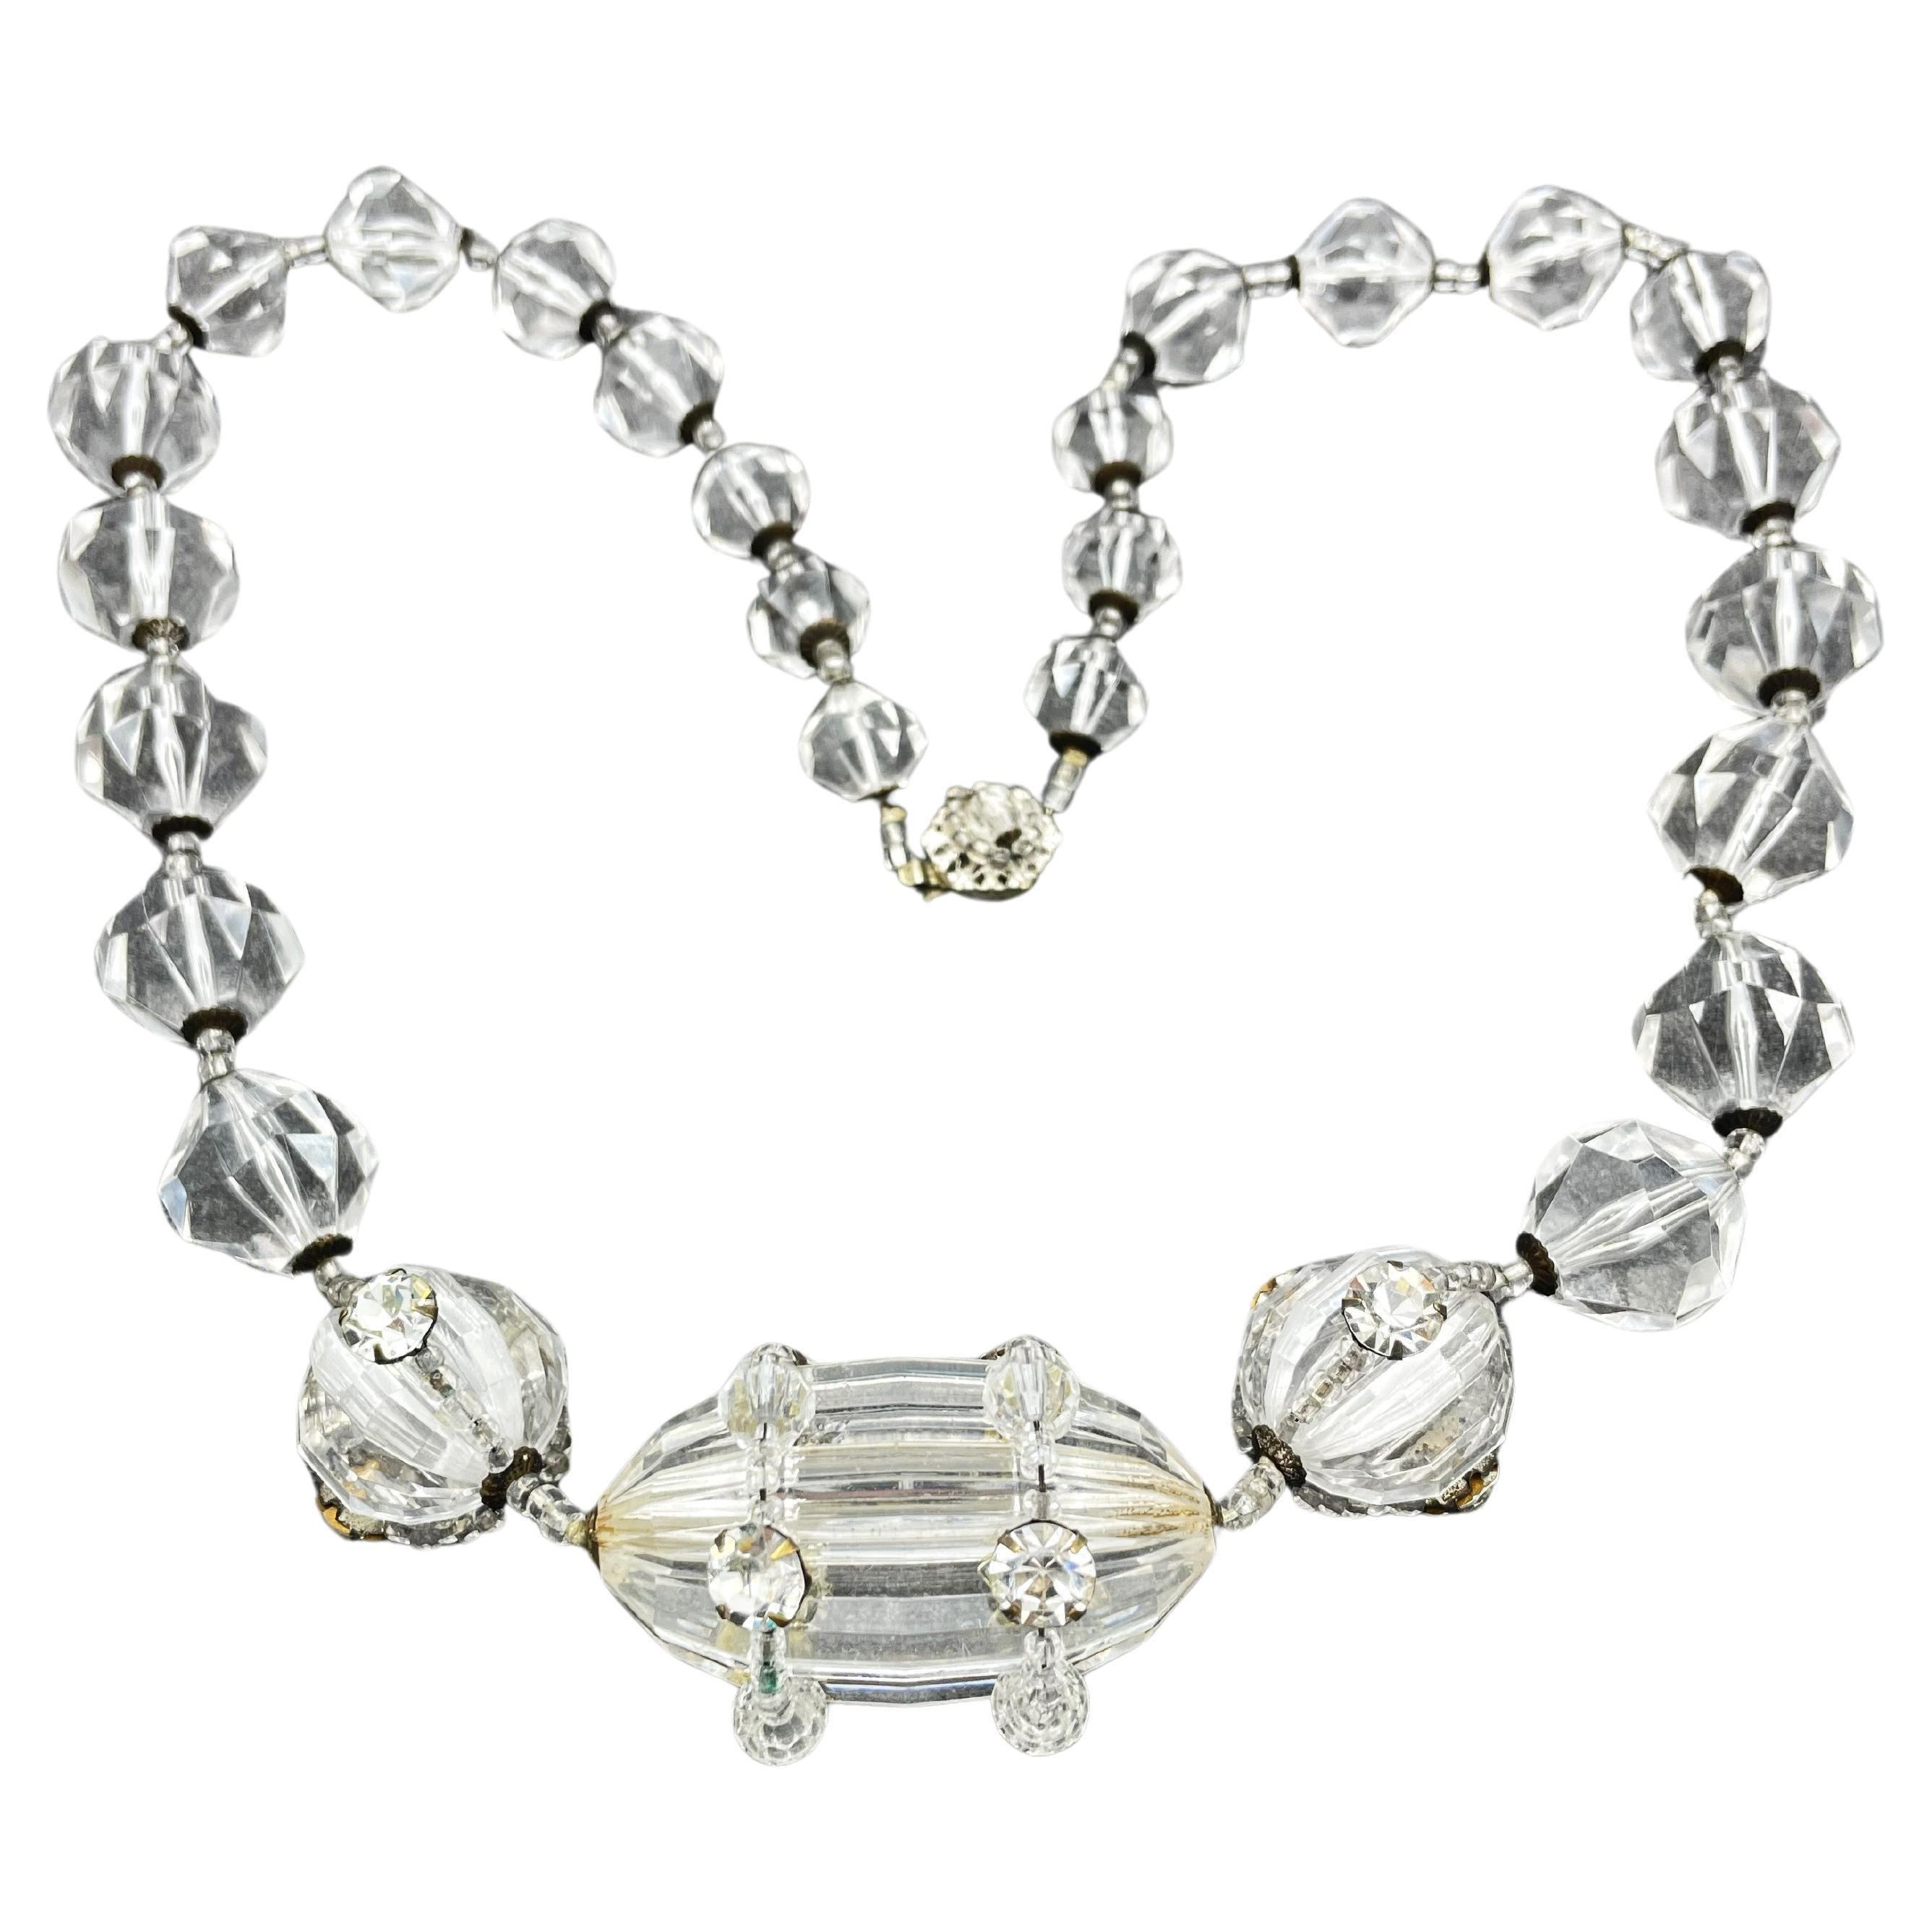 Miriam Haskell necklace with large cut Lucite balls, rhinstones, 1950's USA For Sale